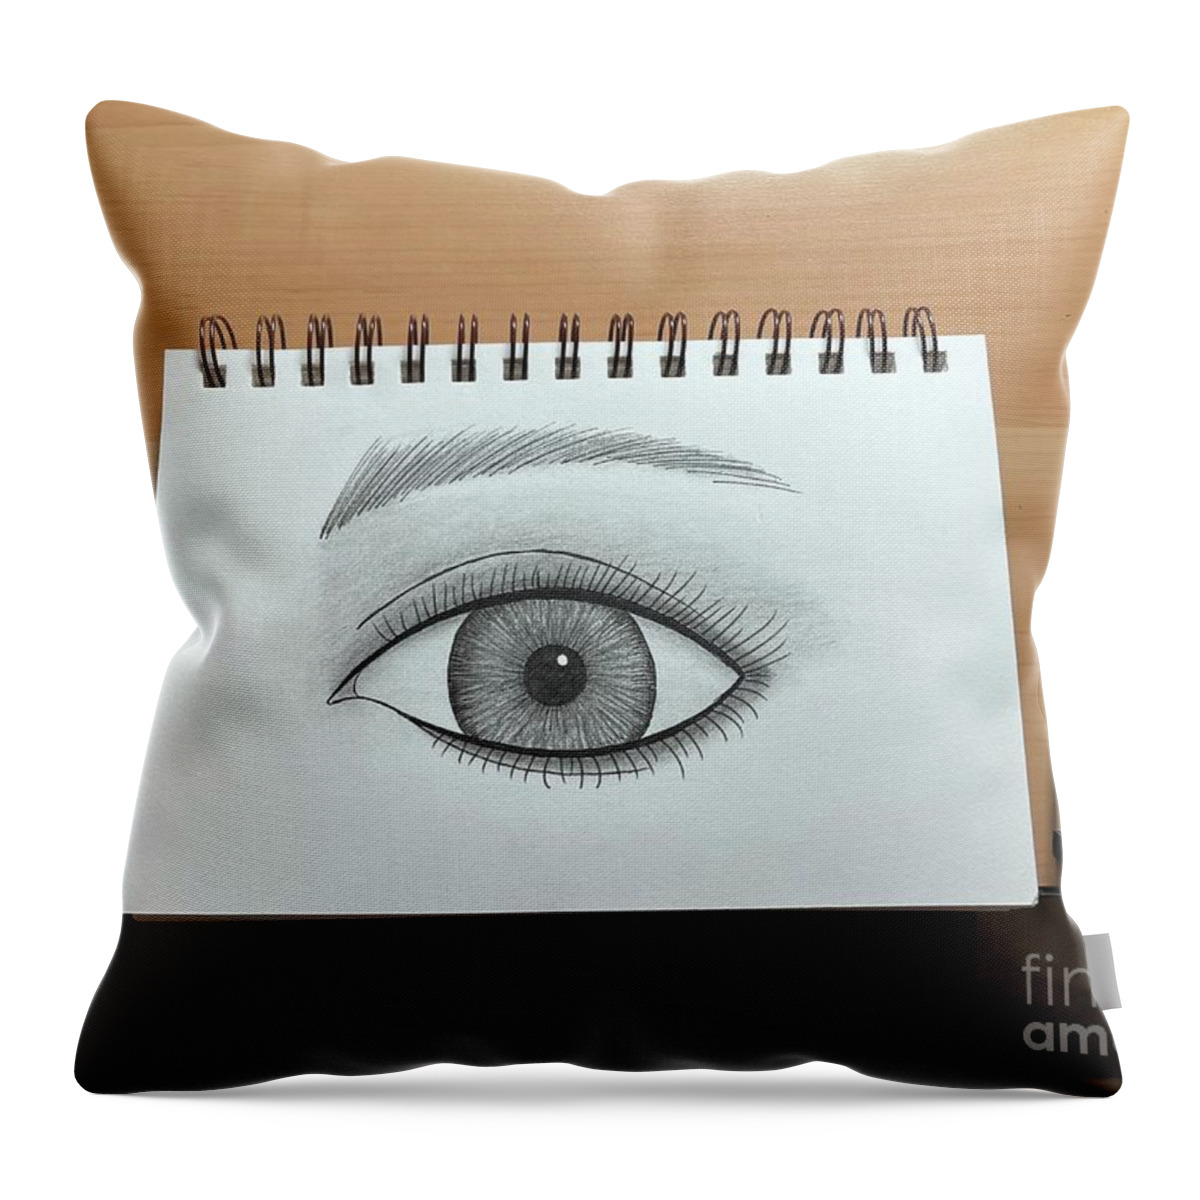  Throw Pillow featuring the digital art Eye challenge by Donna Mibus